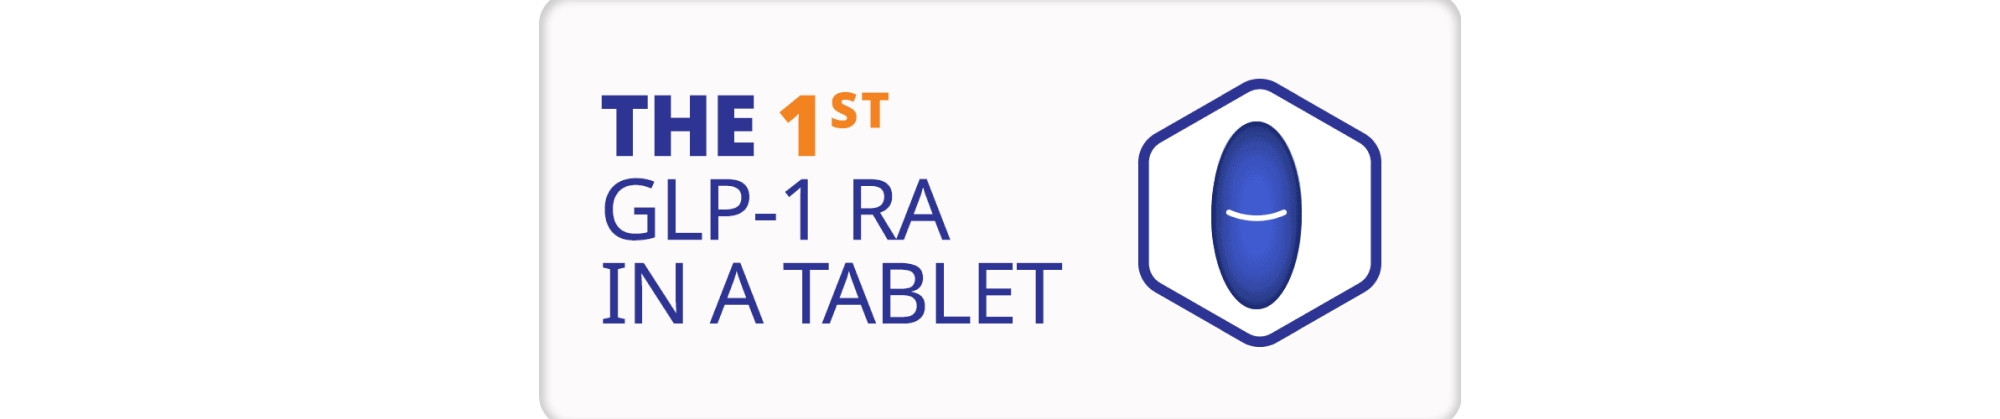 The 1st GLP-1 RA in a tablet